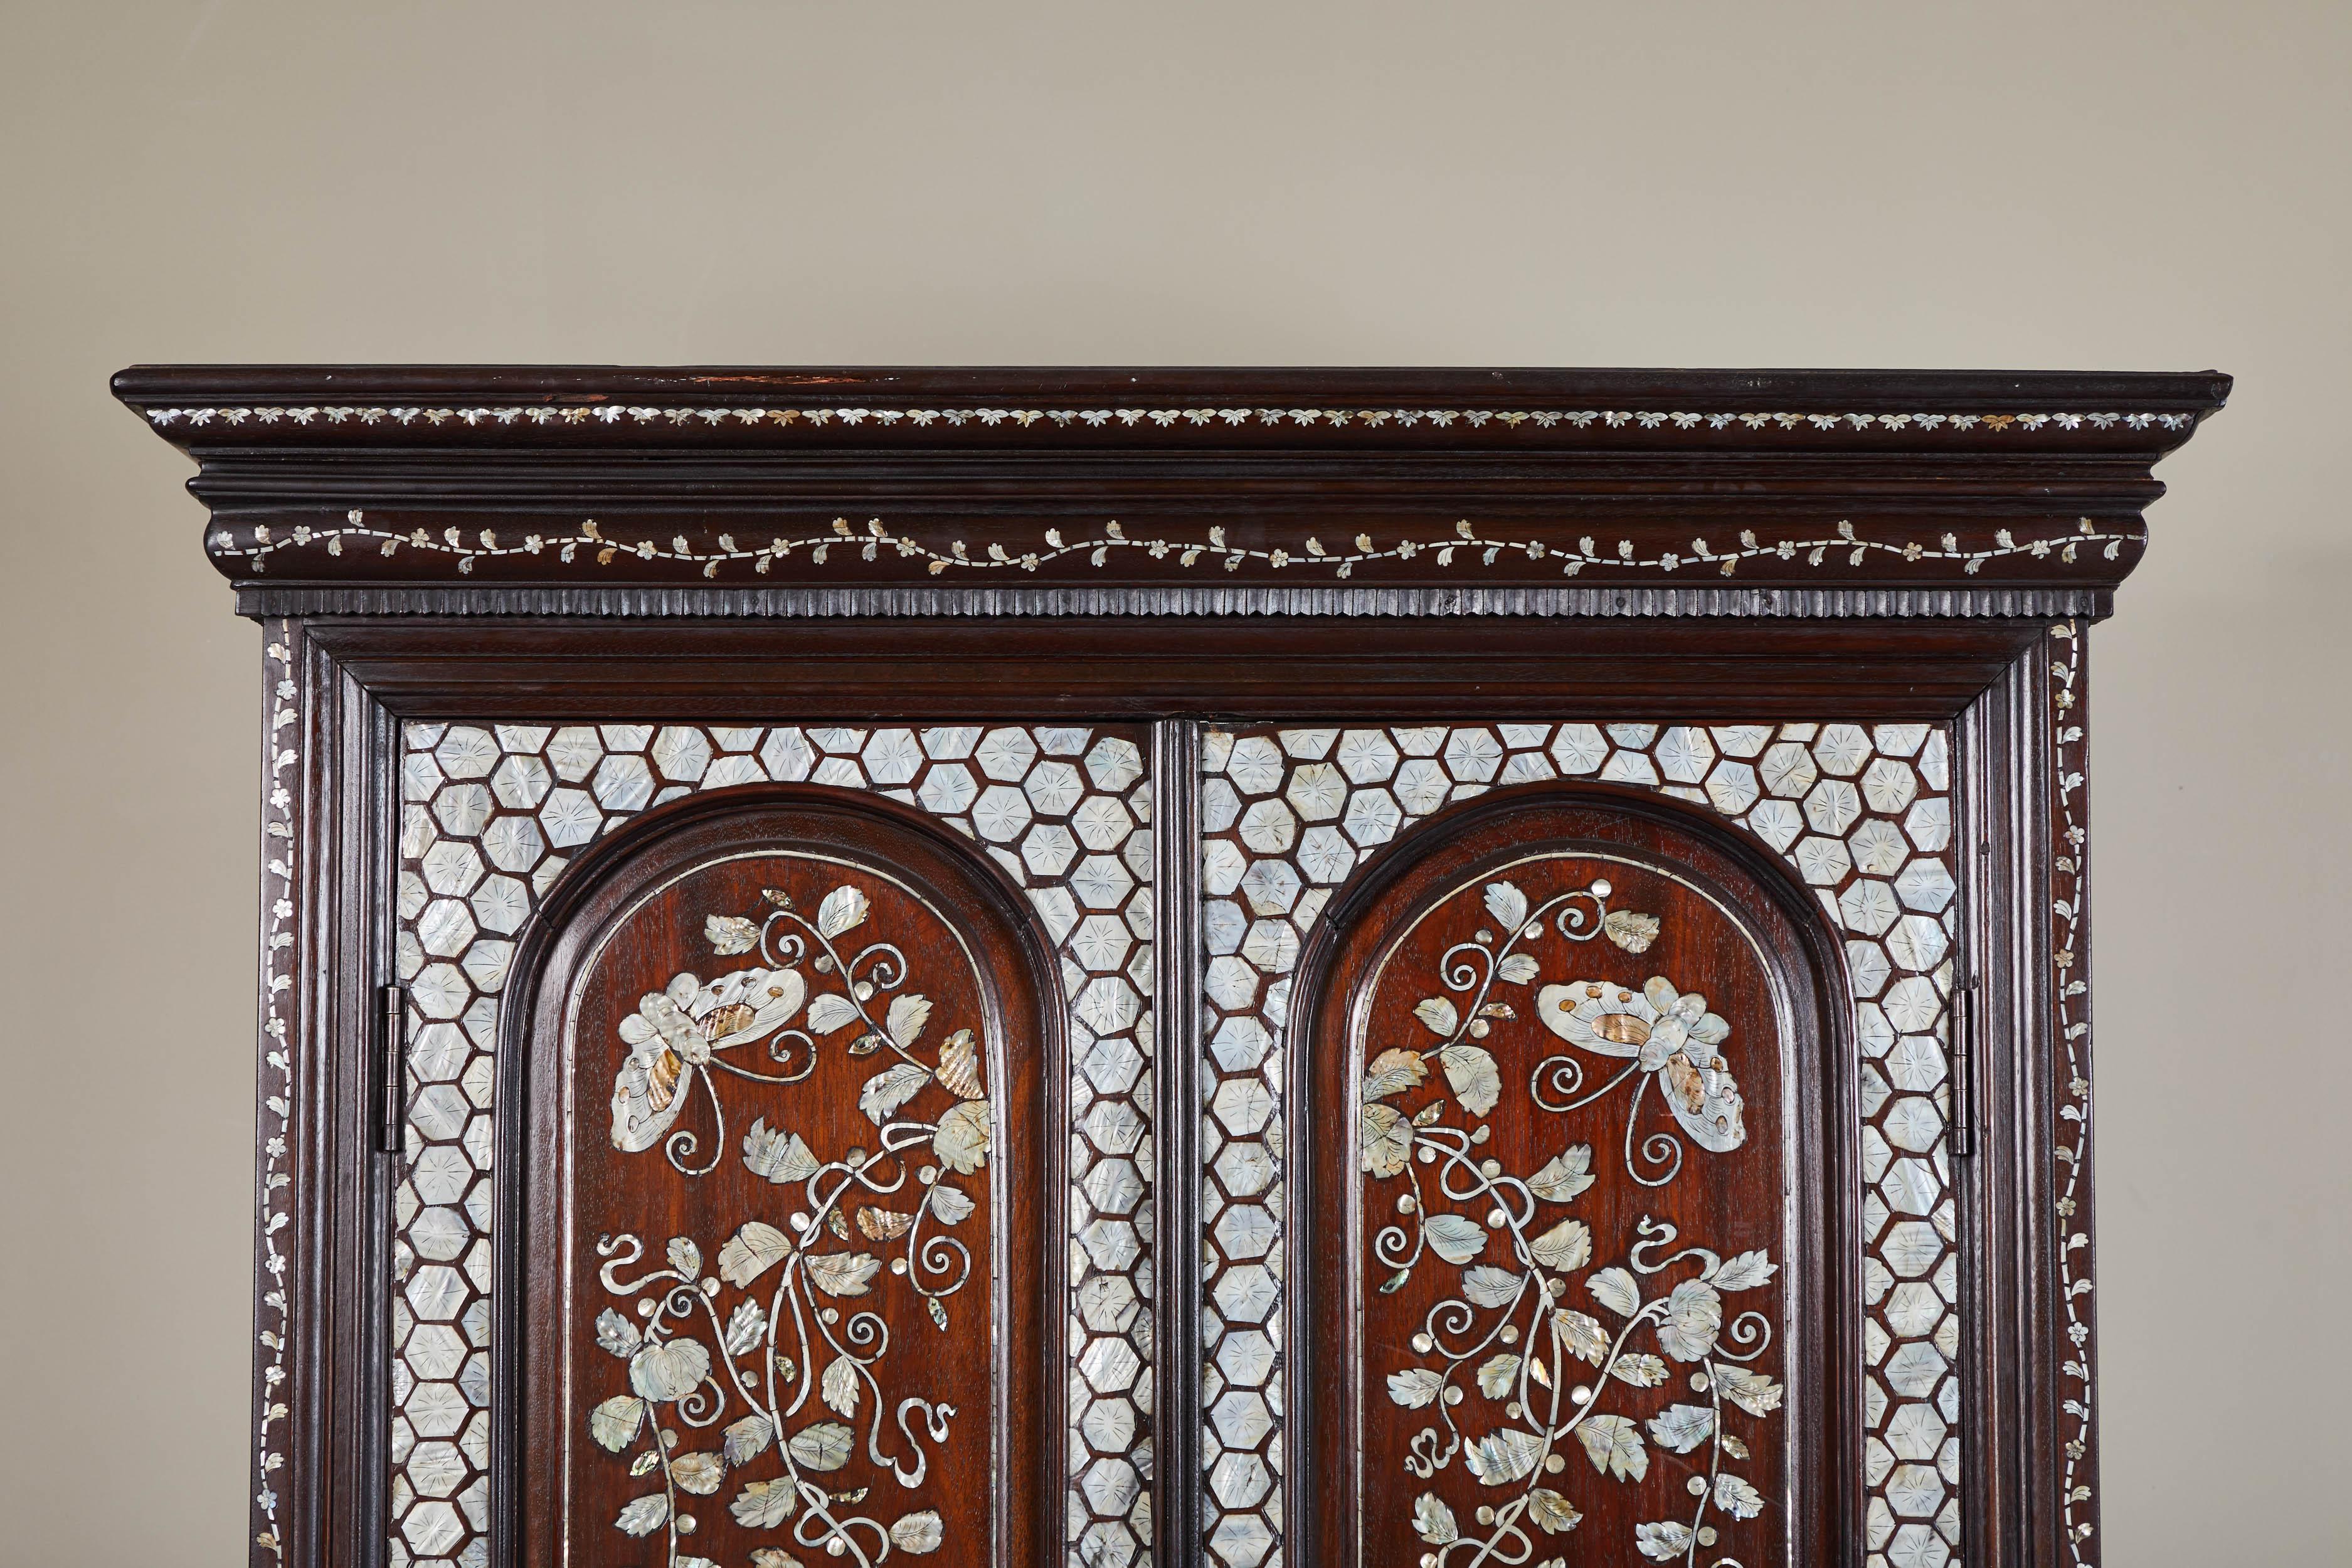 19th century French colonial cabinet with mother-of-pearl inlay along all panels. Hexagonal mosaic along door trim, with floral and butterfly motif throughout door fronts, along feet and top molding.